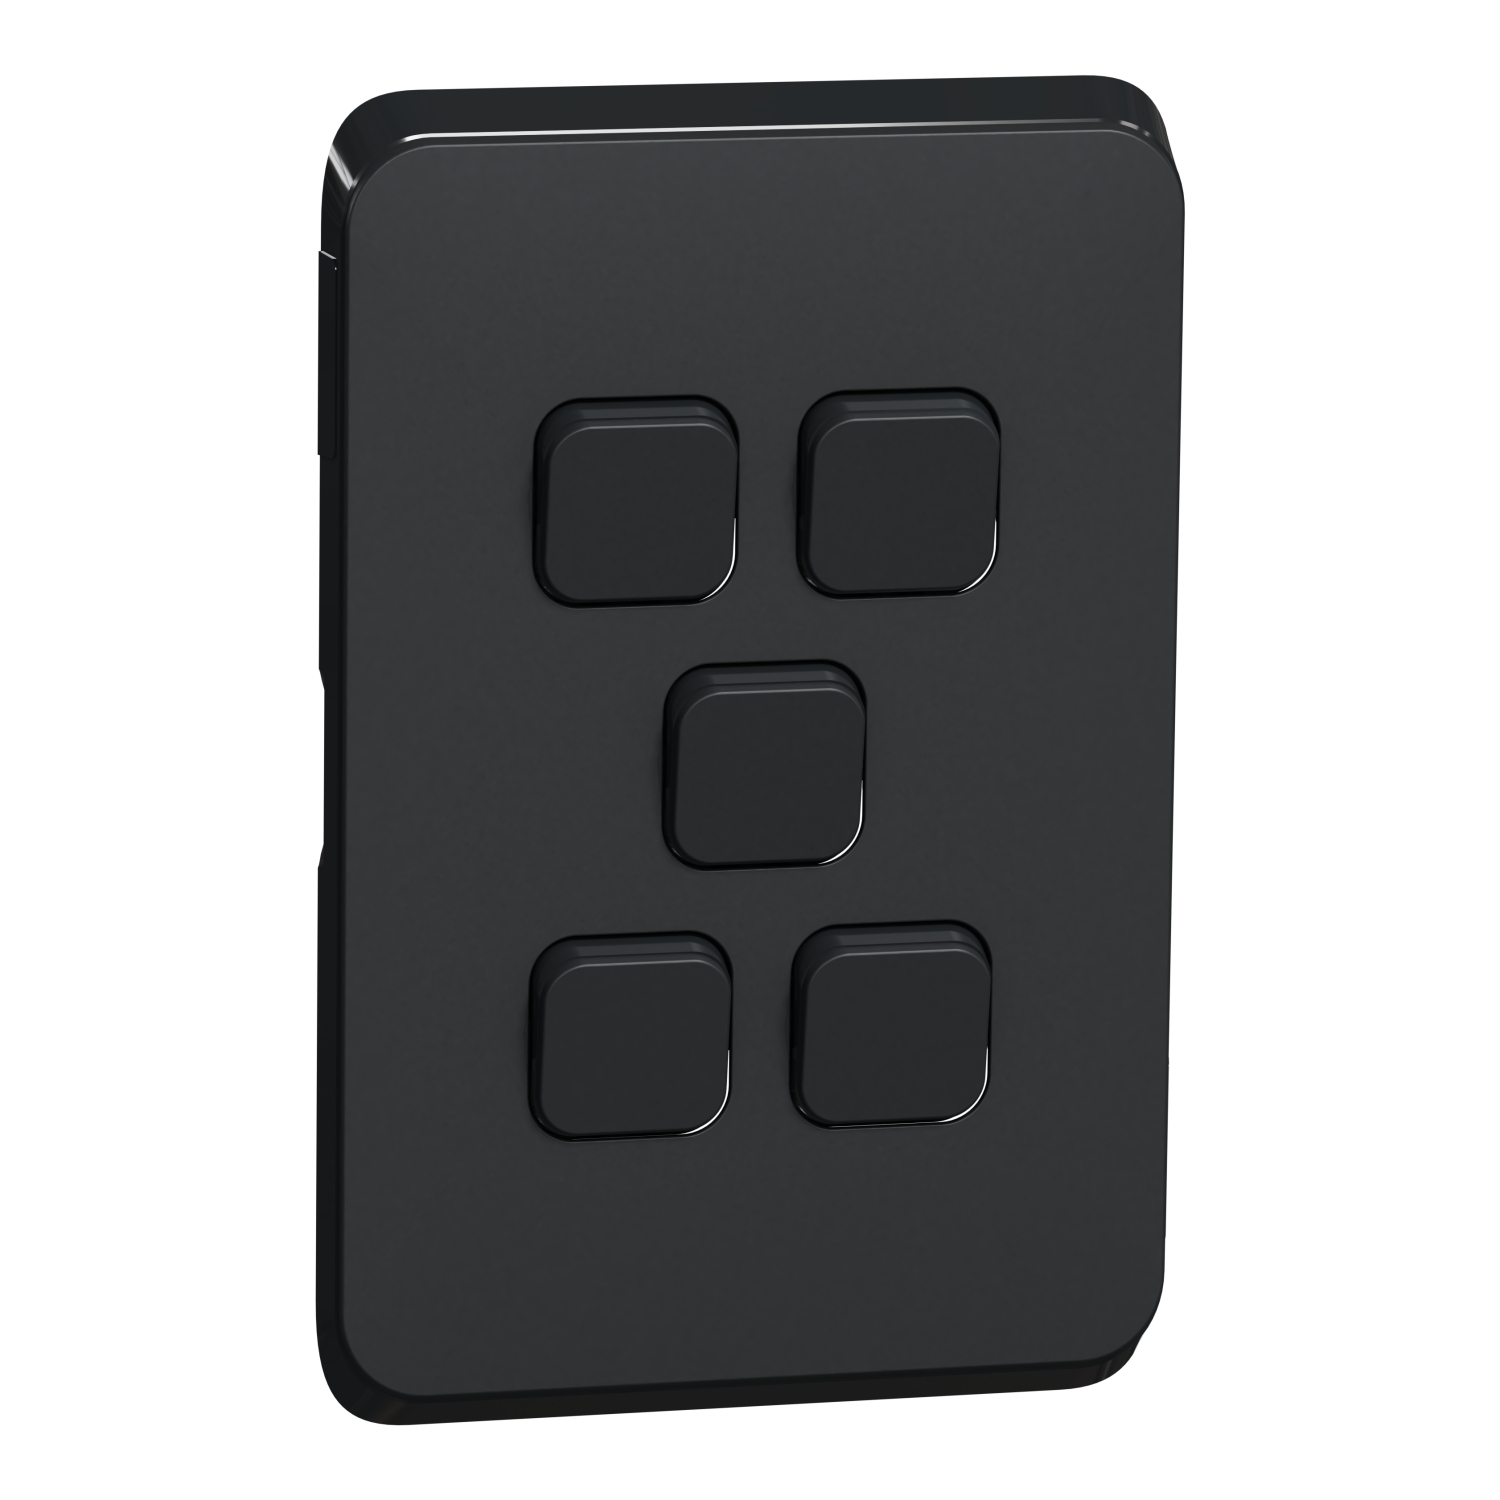 PDL Iconic - Cover Plate Switch 5-Gang - Solid Black